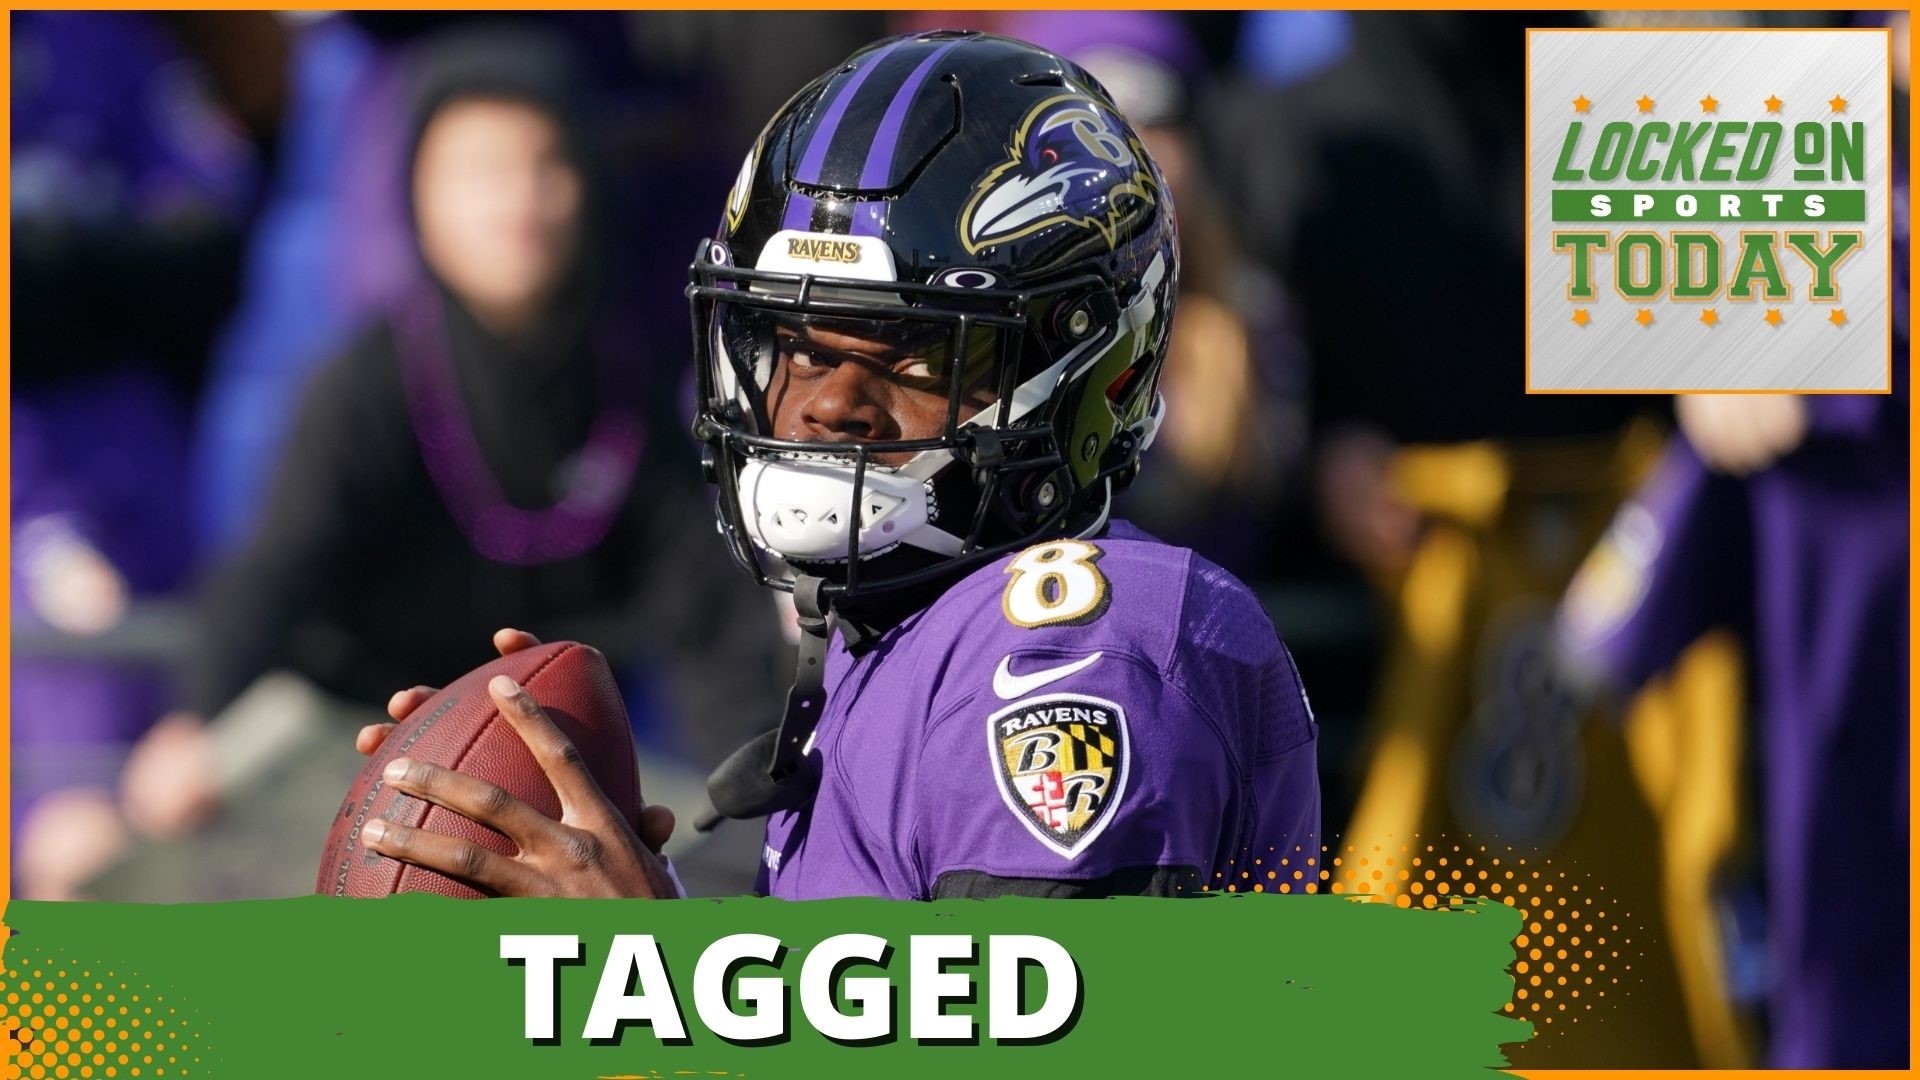 Discussing the day's top sports stories from Lamar Jackson and the Ravens no longer being exclusive to the Jets courting Aaron Rodgers.